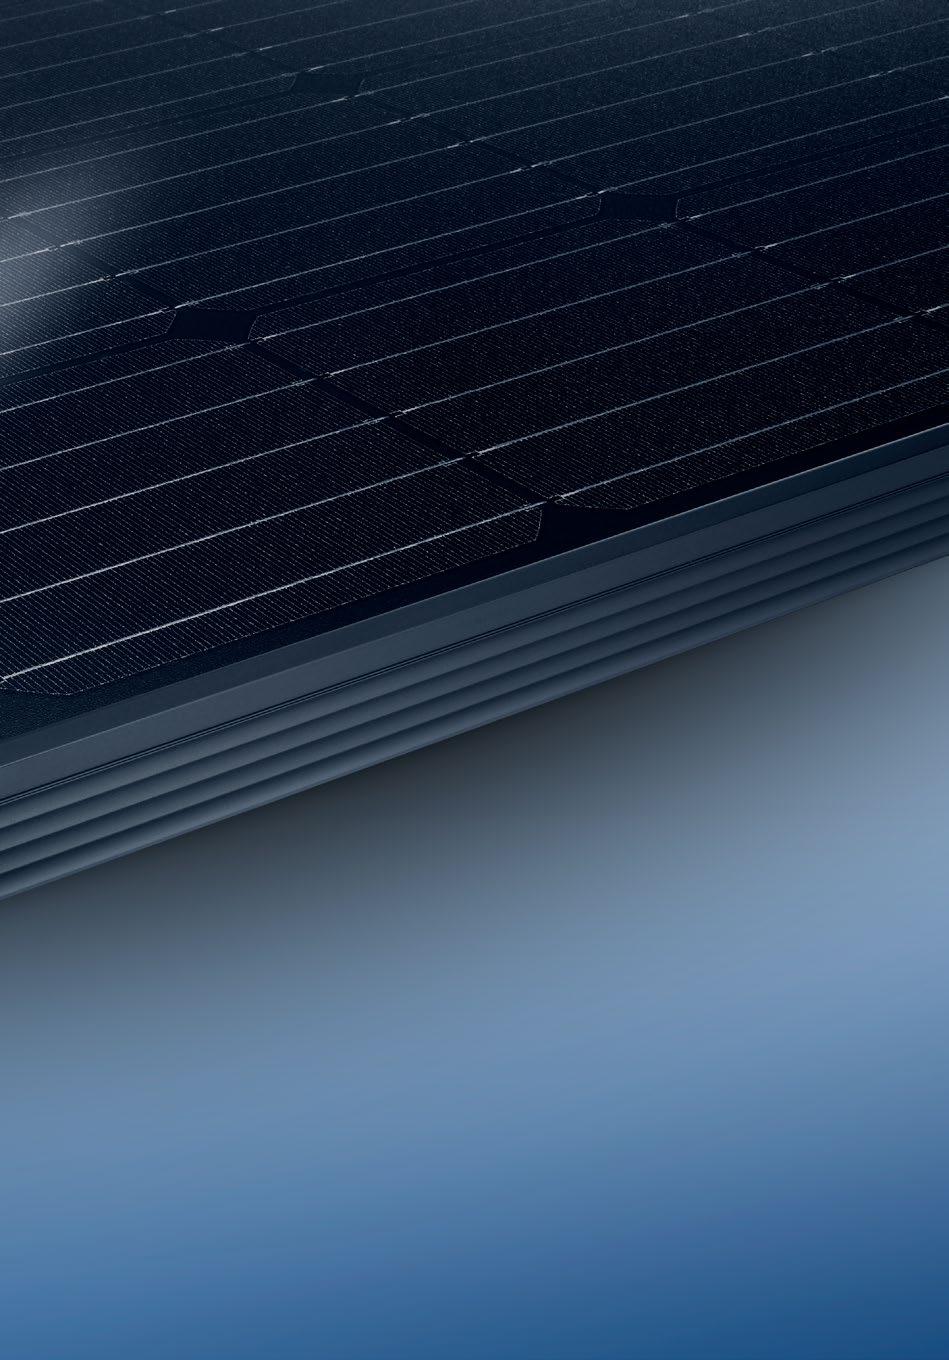 FIND OUT MORE Do you have any questions about SolarWorld s quality standards or individual